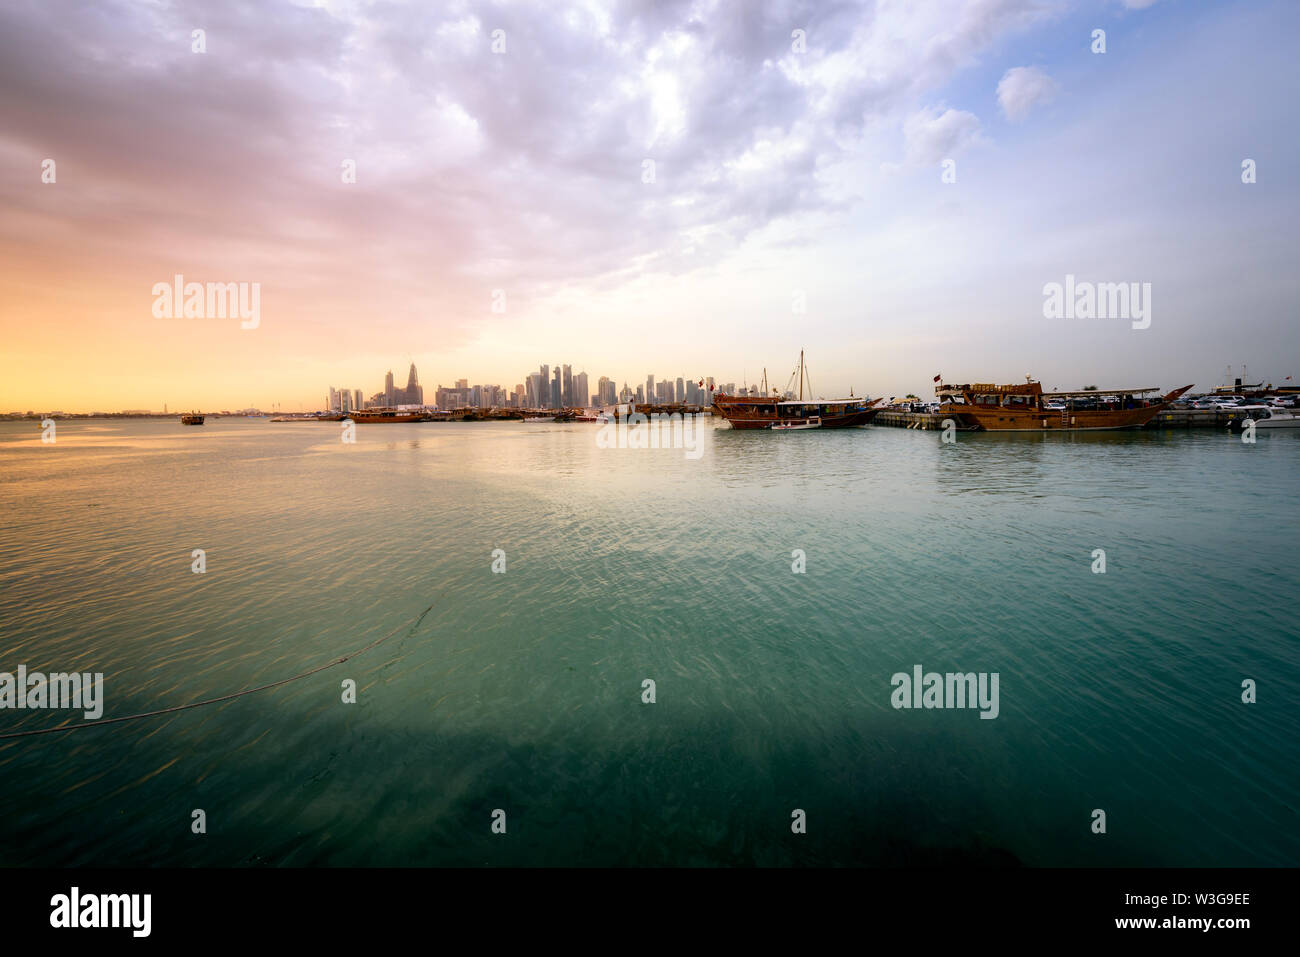 Panoramic view of financial center of Doha at sunset Stock Photo